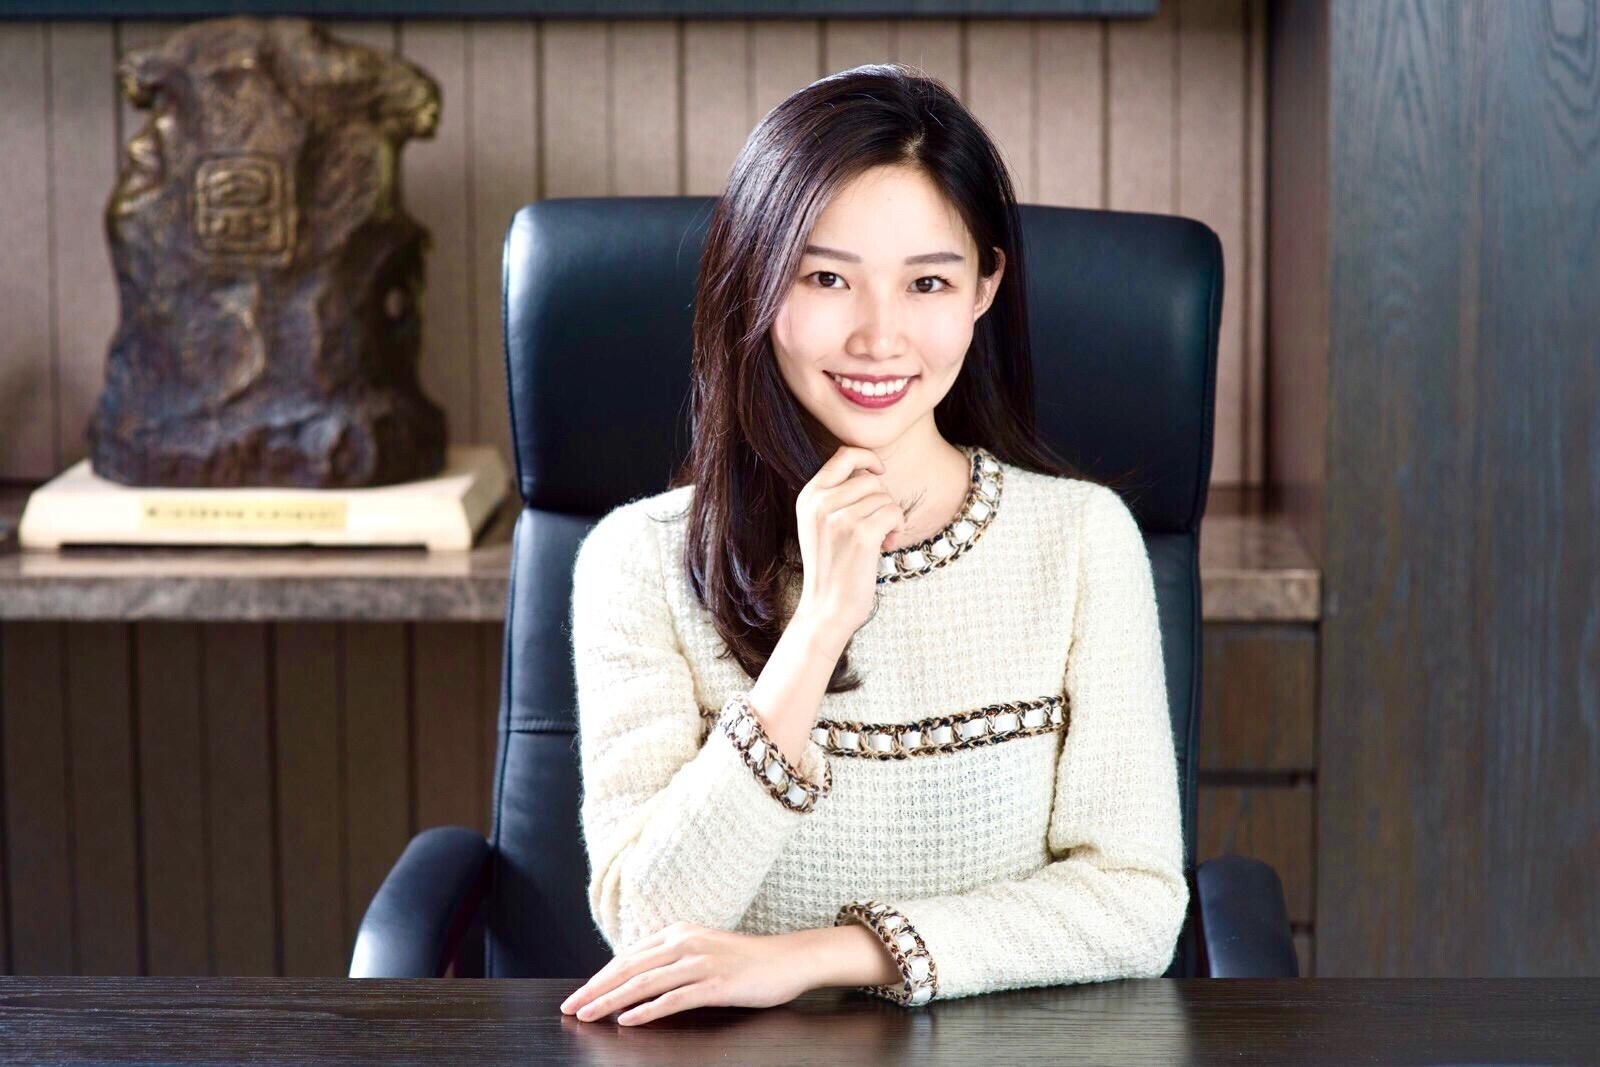 Xie Qirun, also known as Theresa Tse, one of the richest women in China. Photo: sohu.com